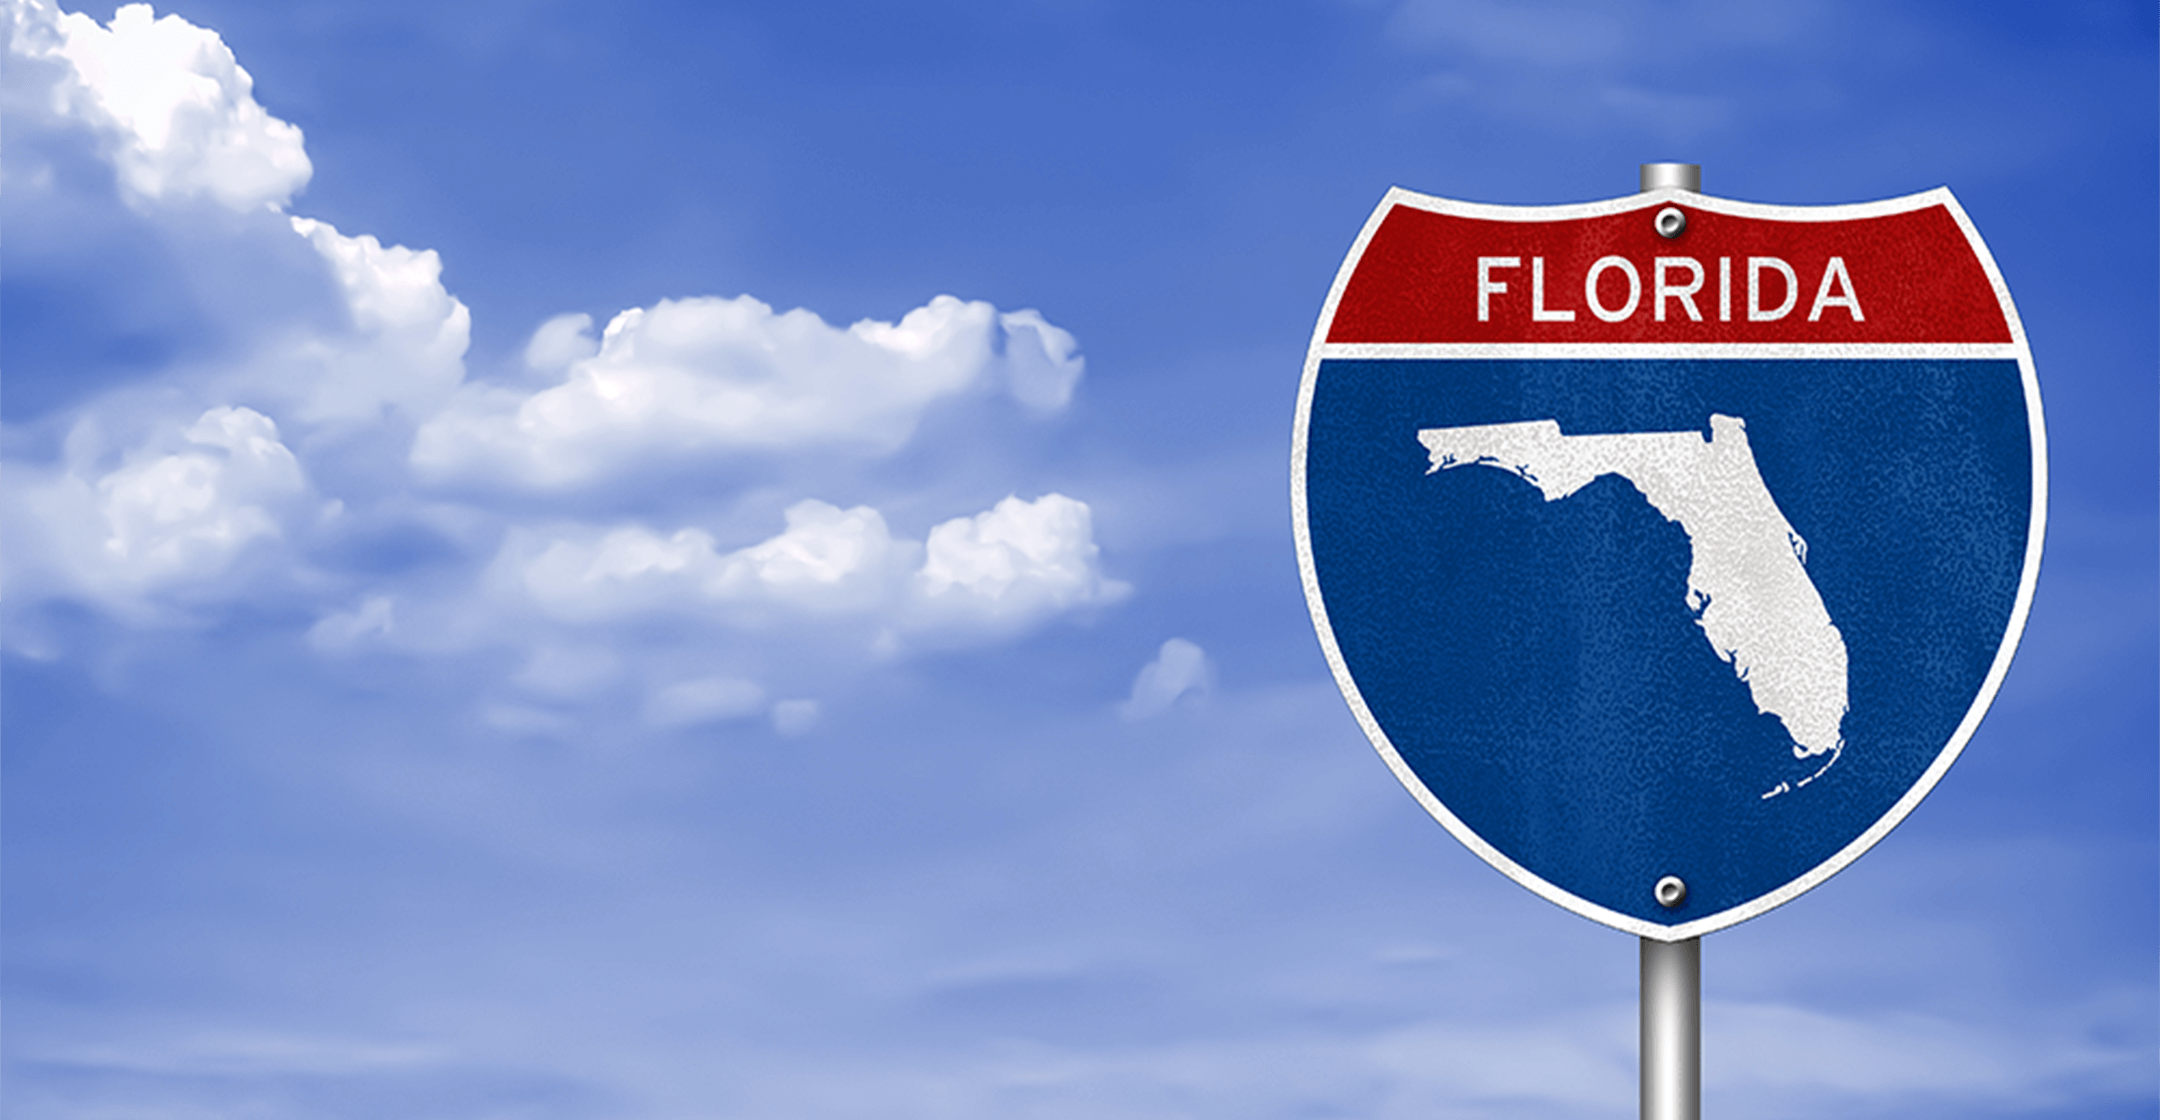 10 Florida Counties With The Lowest Property Taxes